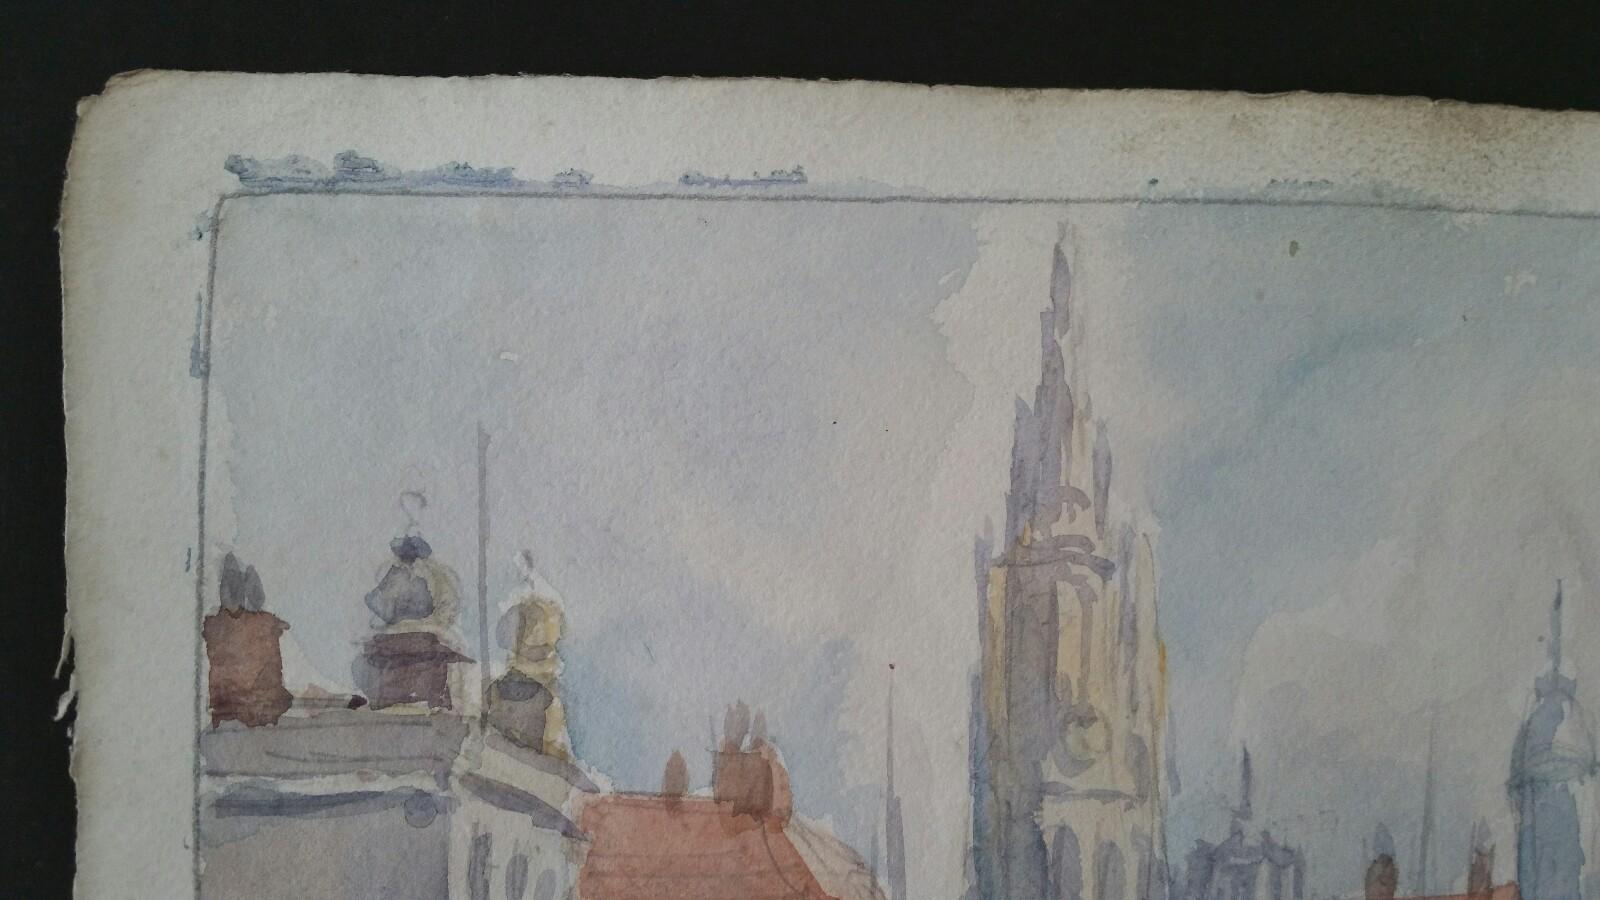 Belgium: Port and Cathedral view in Antwerp
by Leonard Machin Rowe (1880-1968)
signed lower right
watercolour painting on artist's paper, unframed

Image: 9.75 x 13.75 inches, sheet 11 x 15 inches

Charming painting by Leon. Rowe. It is inscribed to